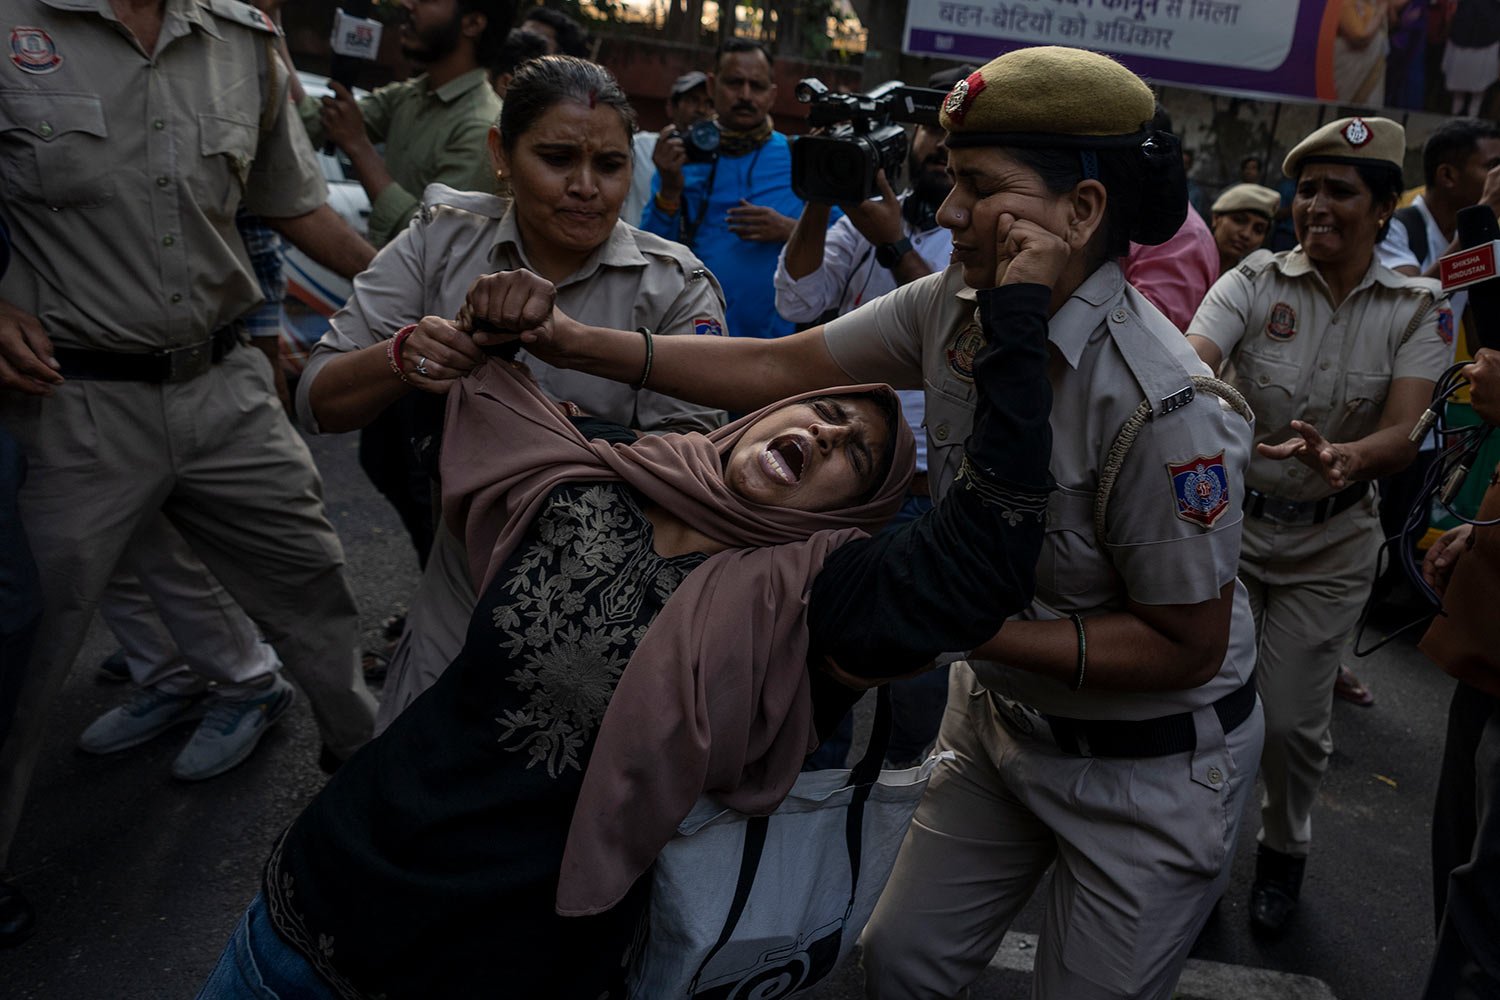  A student activist resists detention while gathering to protest against Israel's military operations in Gaza and to support the Palestinian people, in New Delhi, India, Friday, Oct. 27, 2023. (AP Photo/Altaf Qadri) 